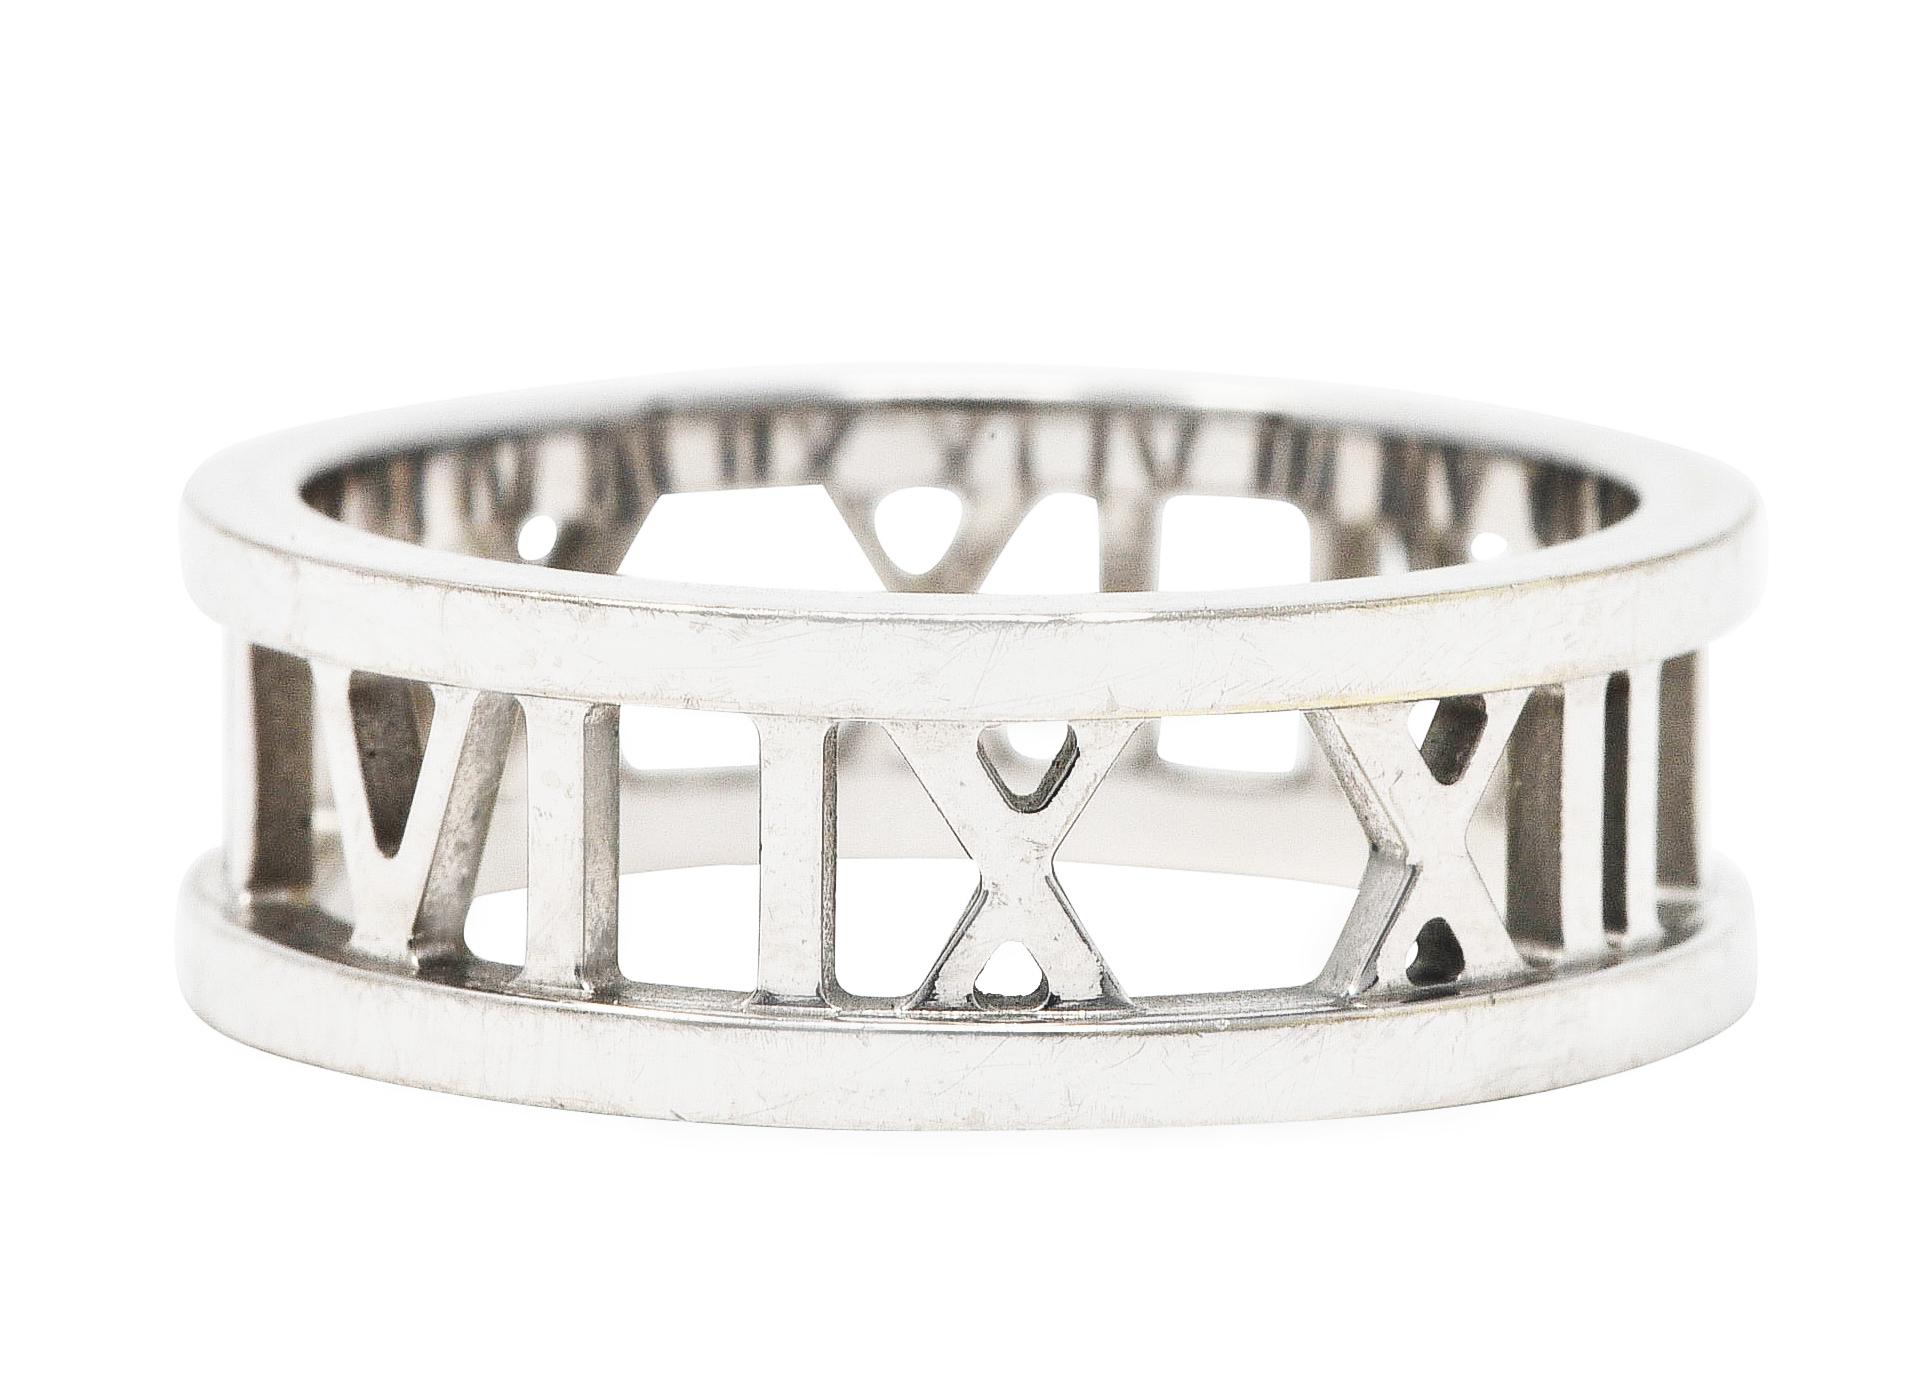 Band ring is pierced with Roman numerals fully around

Motif is flanked North to South by raised and polished edges

Stamped 750 for 18 karat white gold

Fully signed 2003 Tiffany & Co.

From the Atlas collection

Ring size: 7 1/2 and not